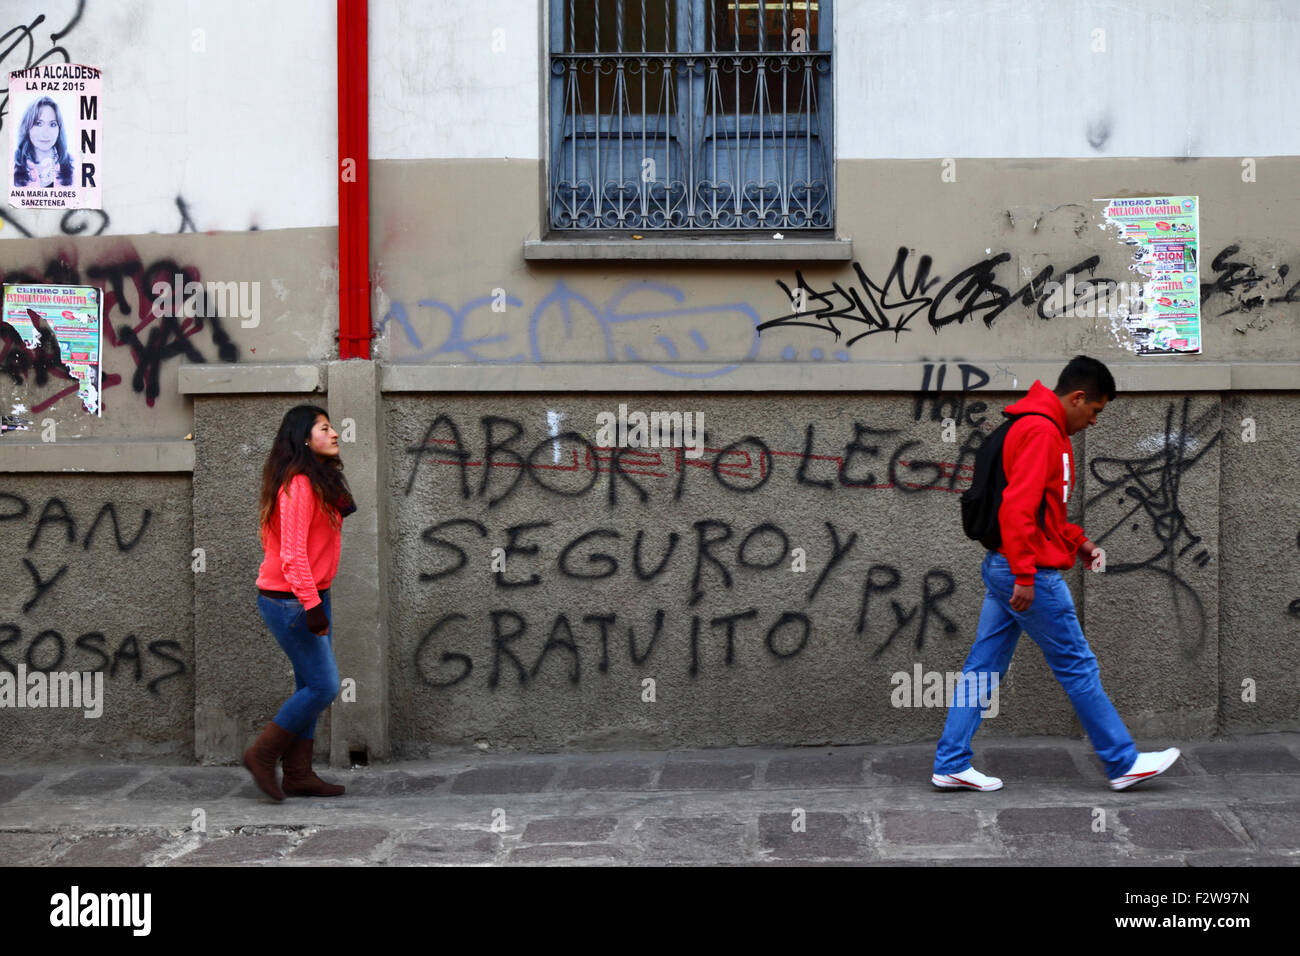 Graffiti on wall demanding the right to safe, legal, free abortion for women, La Paz, Bolivia Stock Photo